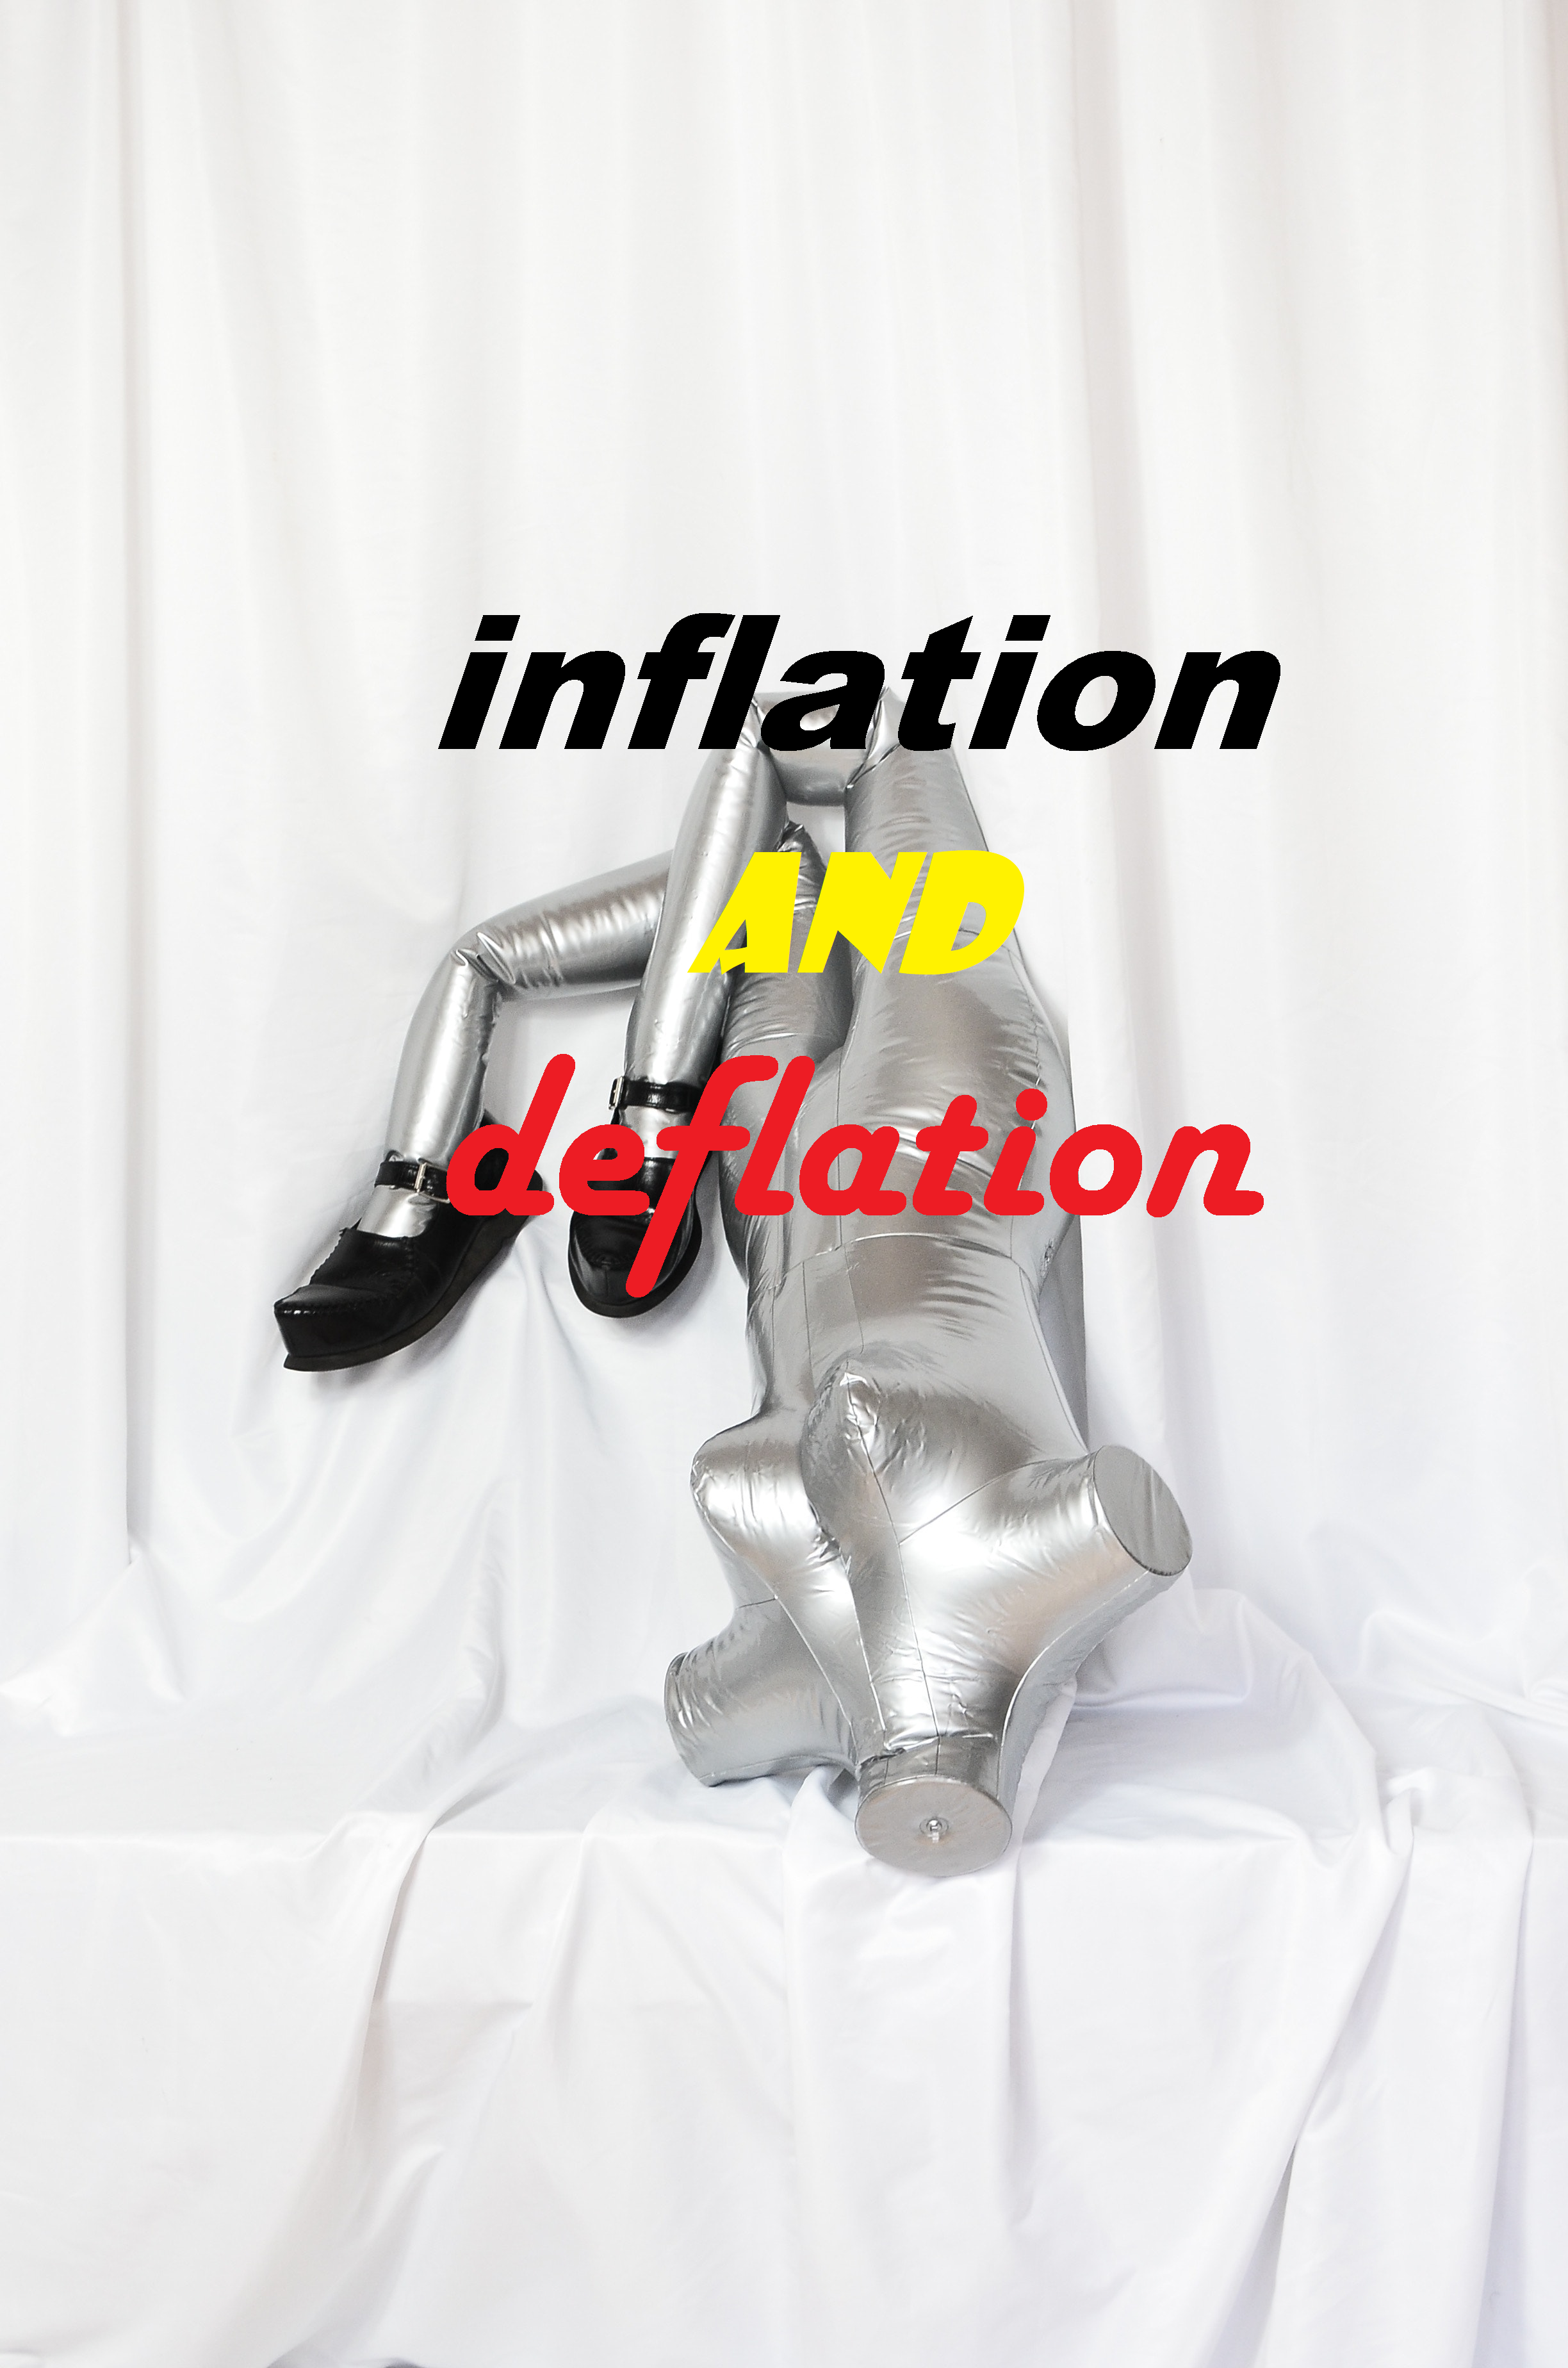 Inflation and Deflation: The Ups and Downs of the Economy